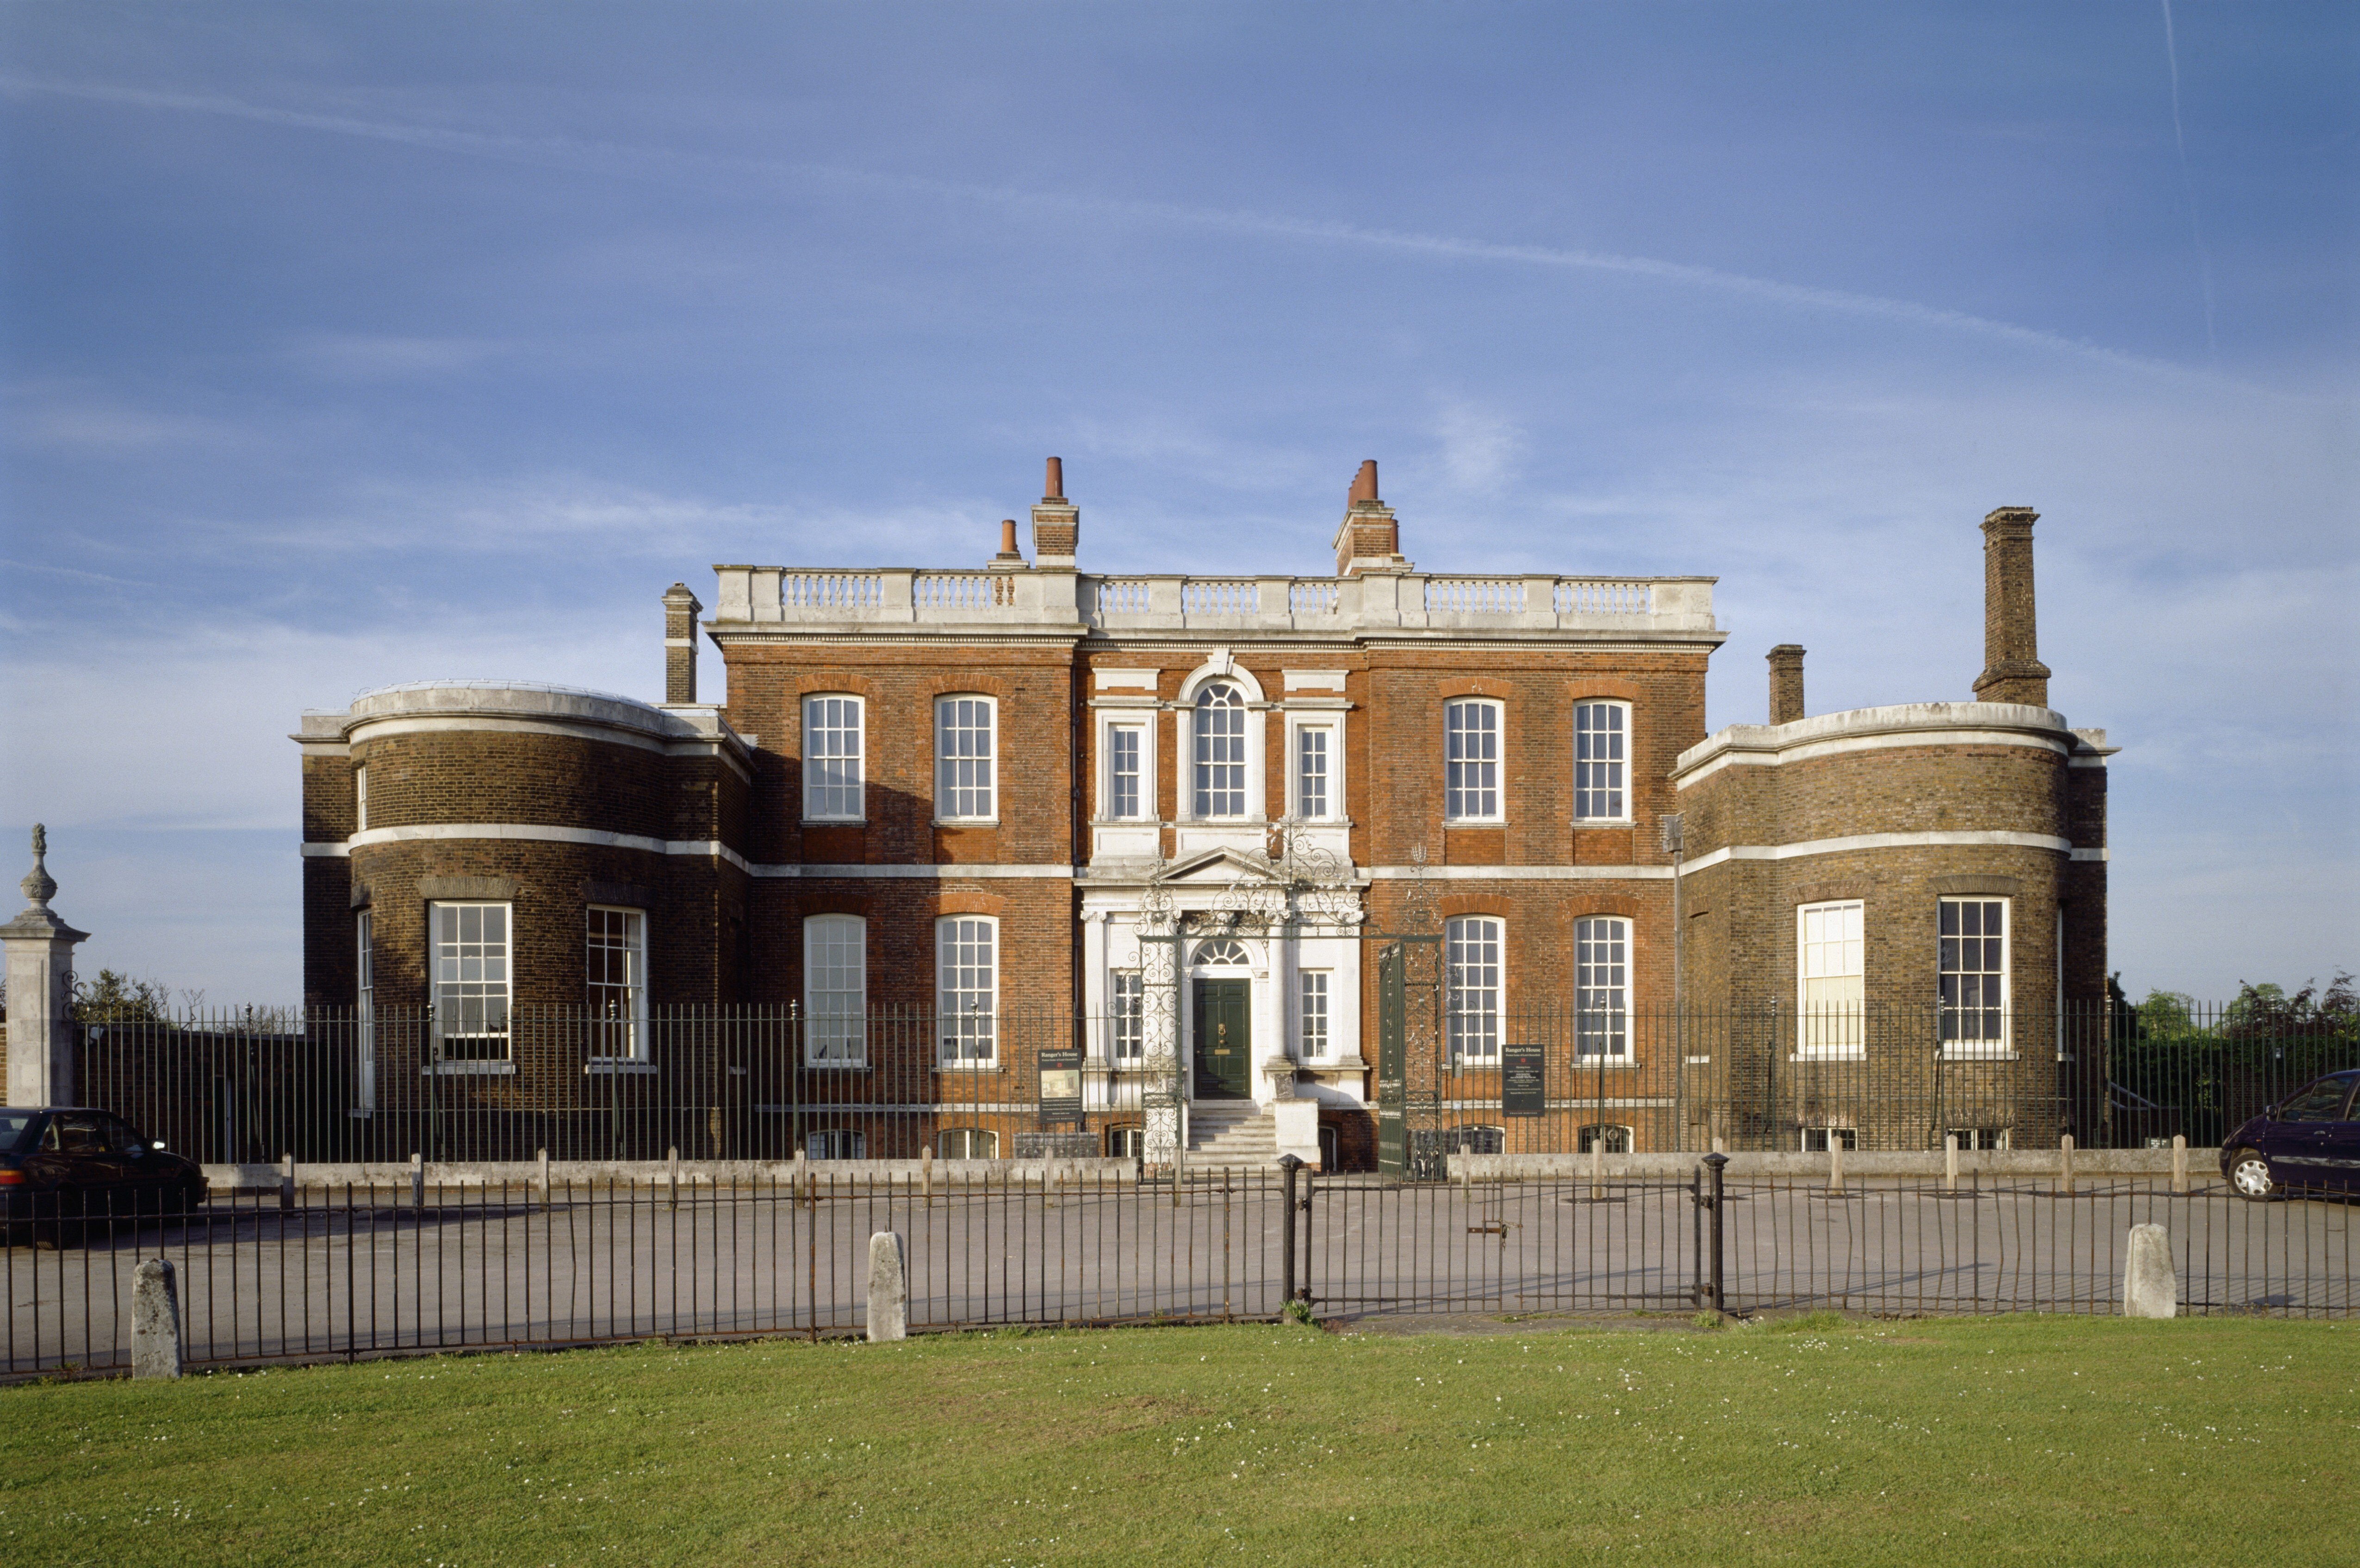 Ranger’s House in Greenwich, London, stands in as Bridgerton House in the series. Photo: Shutterstock